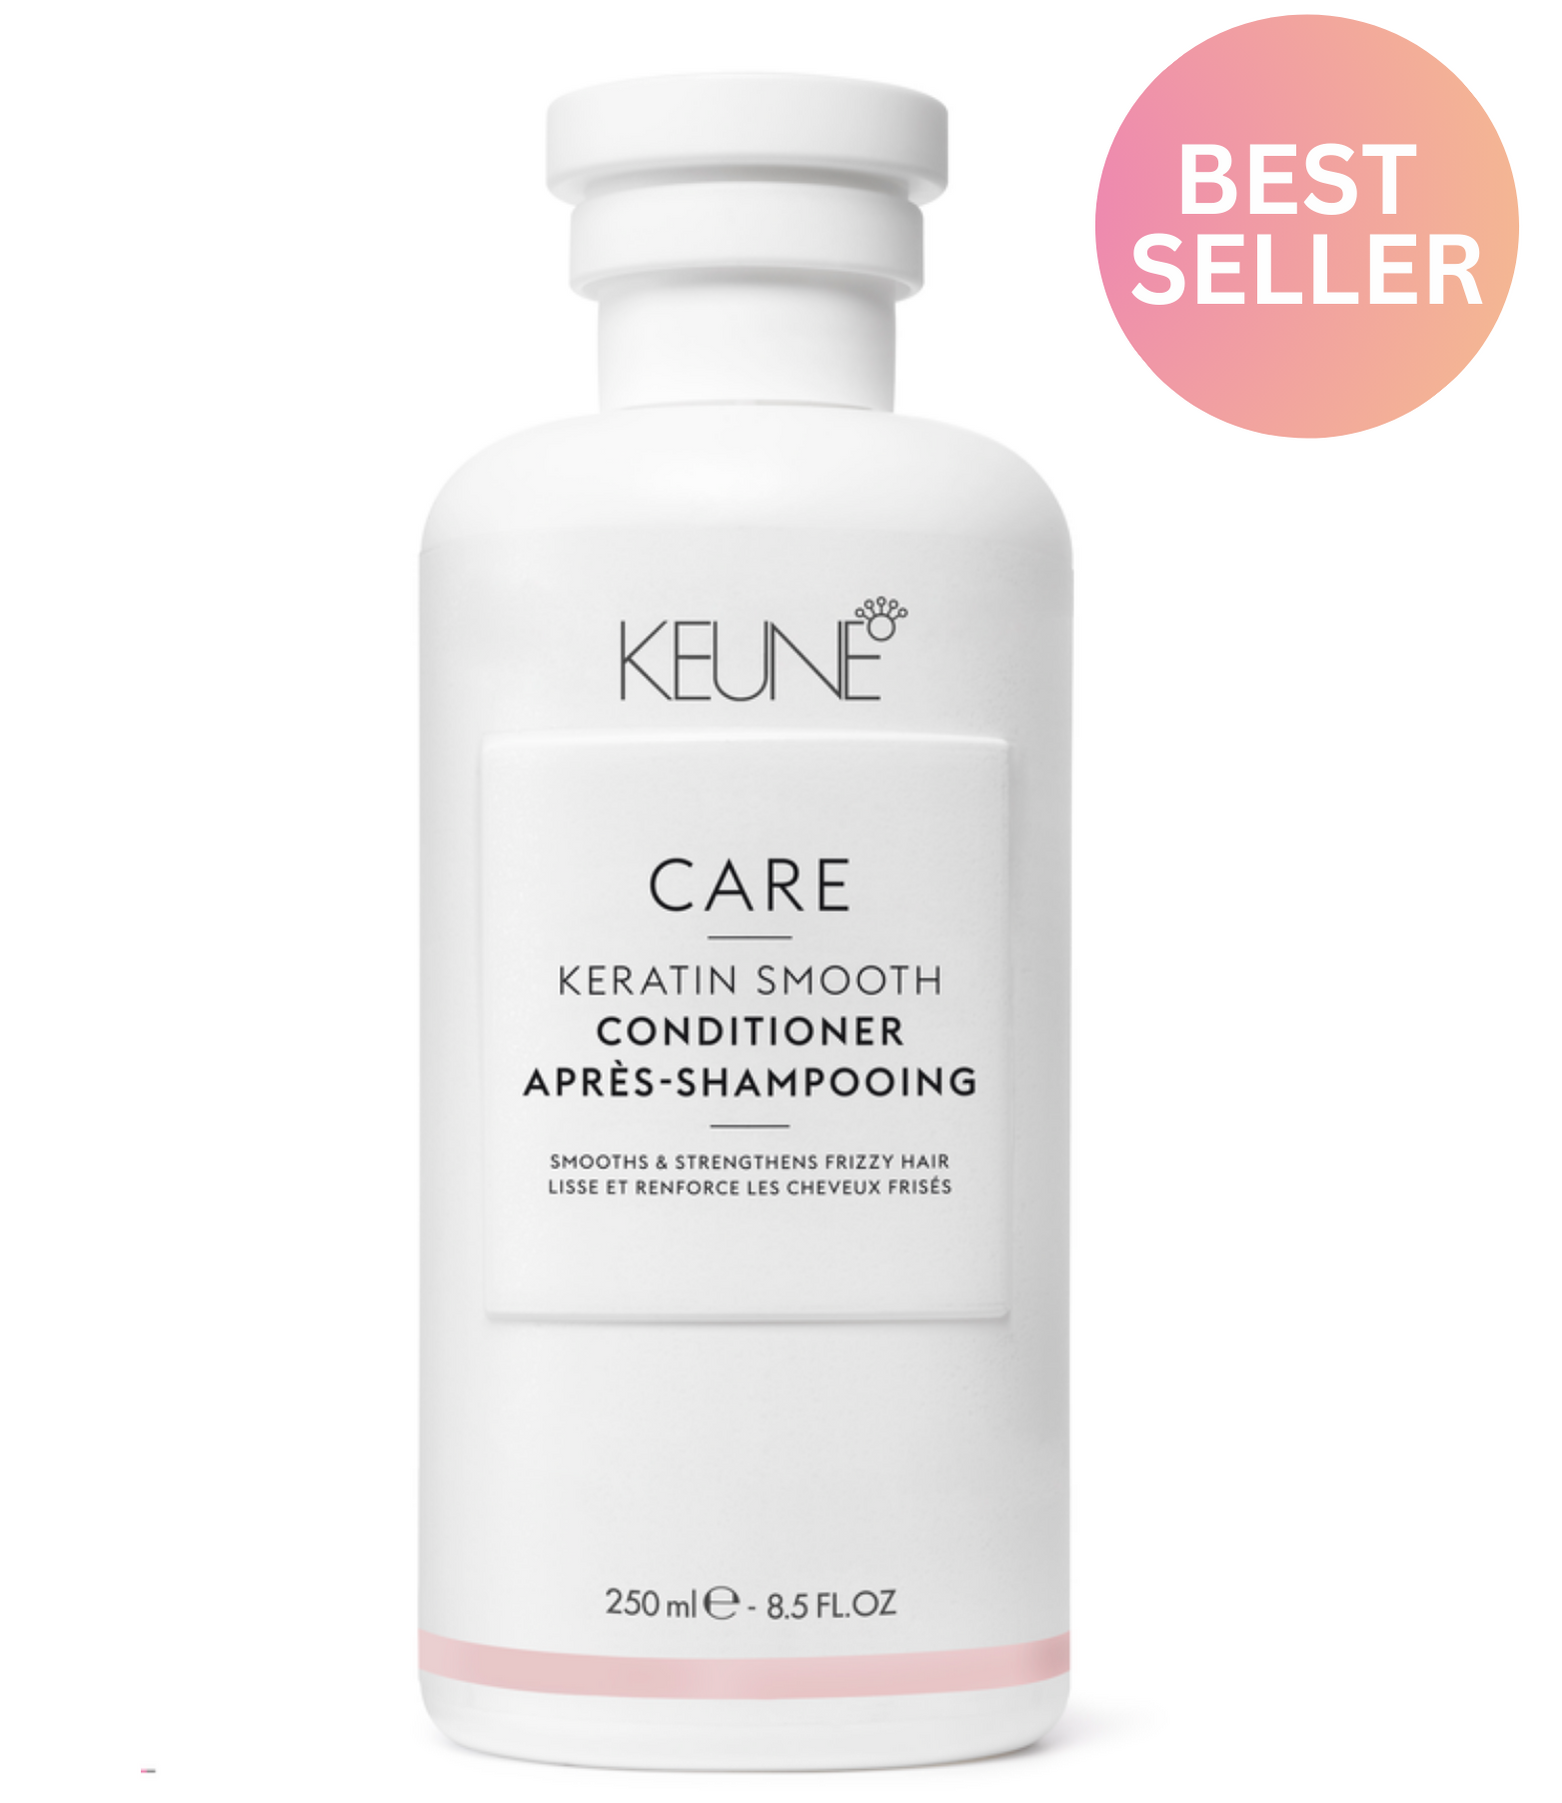 Discover CARE Keratin Smooth Conditioner: Rich hair product with keratin, provitamin B5, and shea butter for shiny, easily manageable hair. Protection against frizz and hair breakage. On keune.ch.